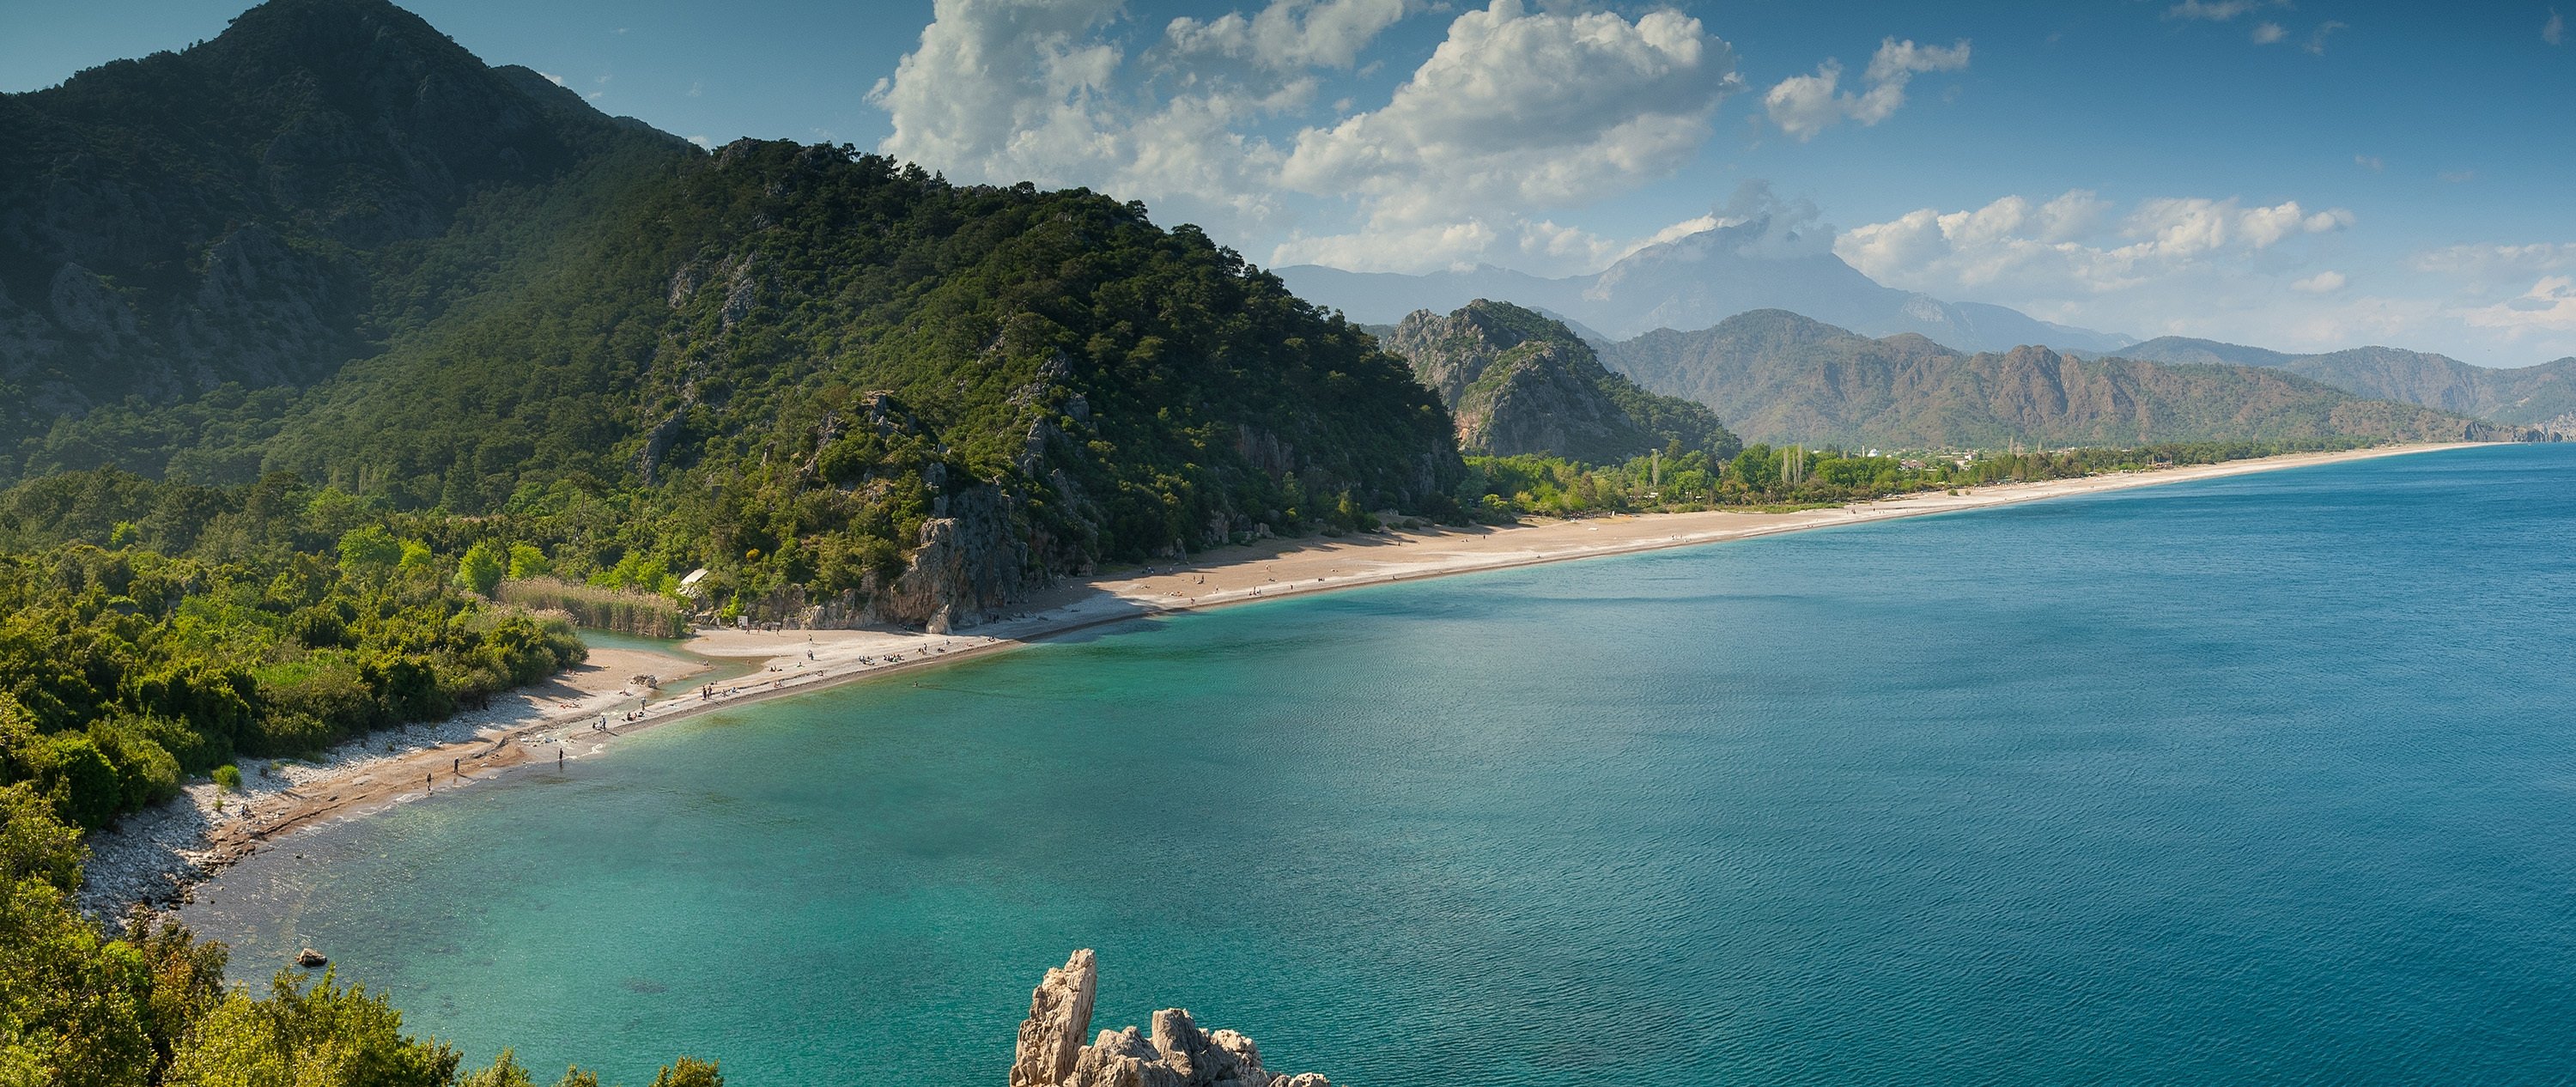 Olympos Beach is situated in the most enchanting part of the Olympus Riviera in Antalya. (Shutterstock Photo)